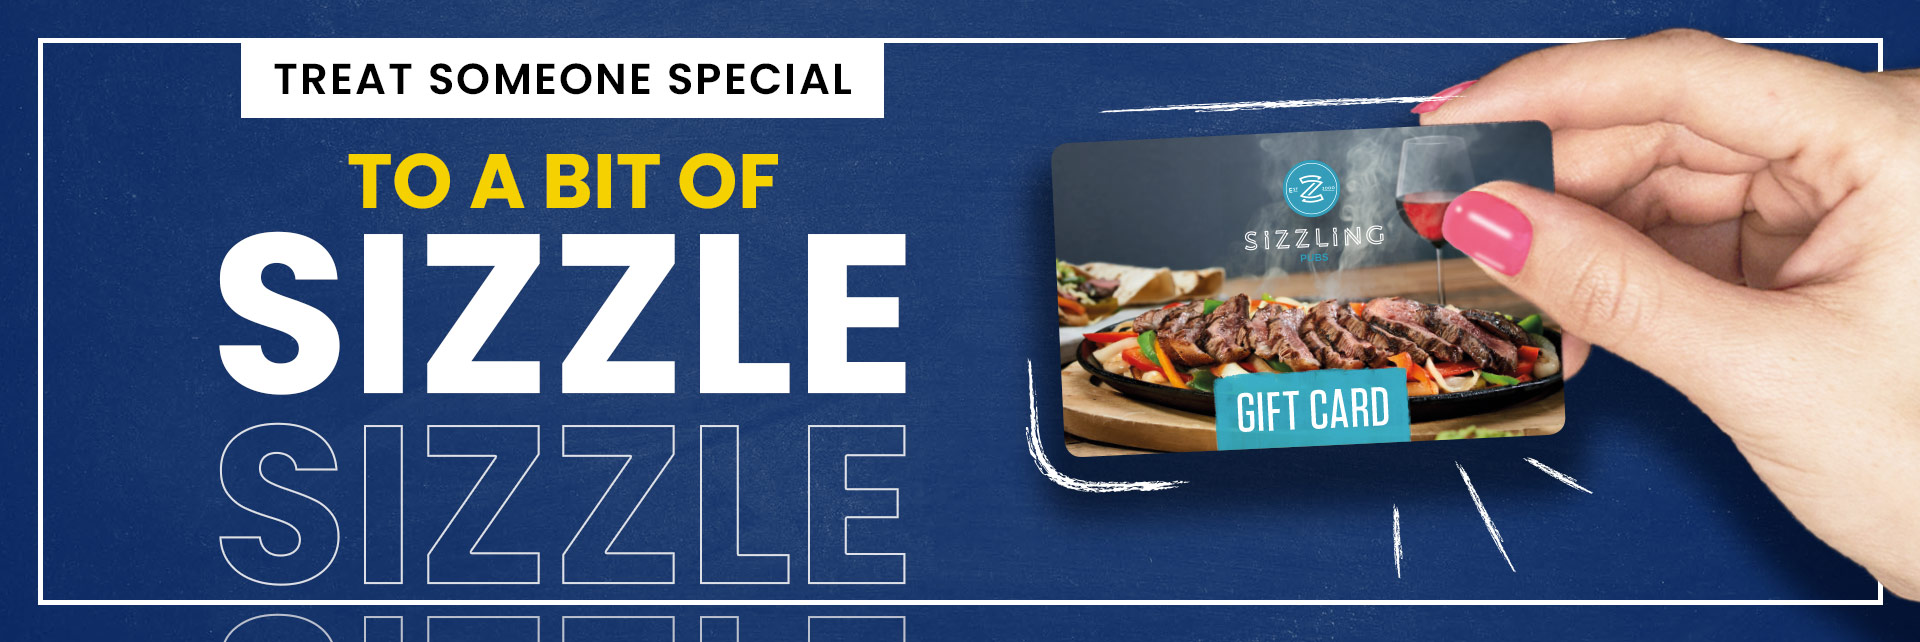 Sizzling Pubs Gift Card at The Clay Pipe Inn in Poole